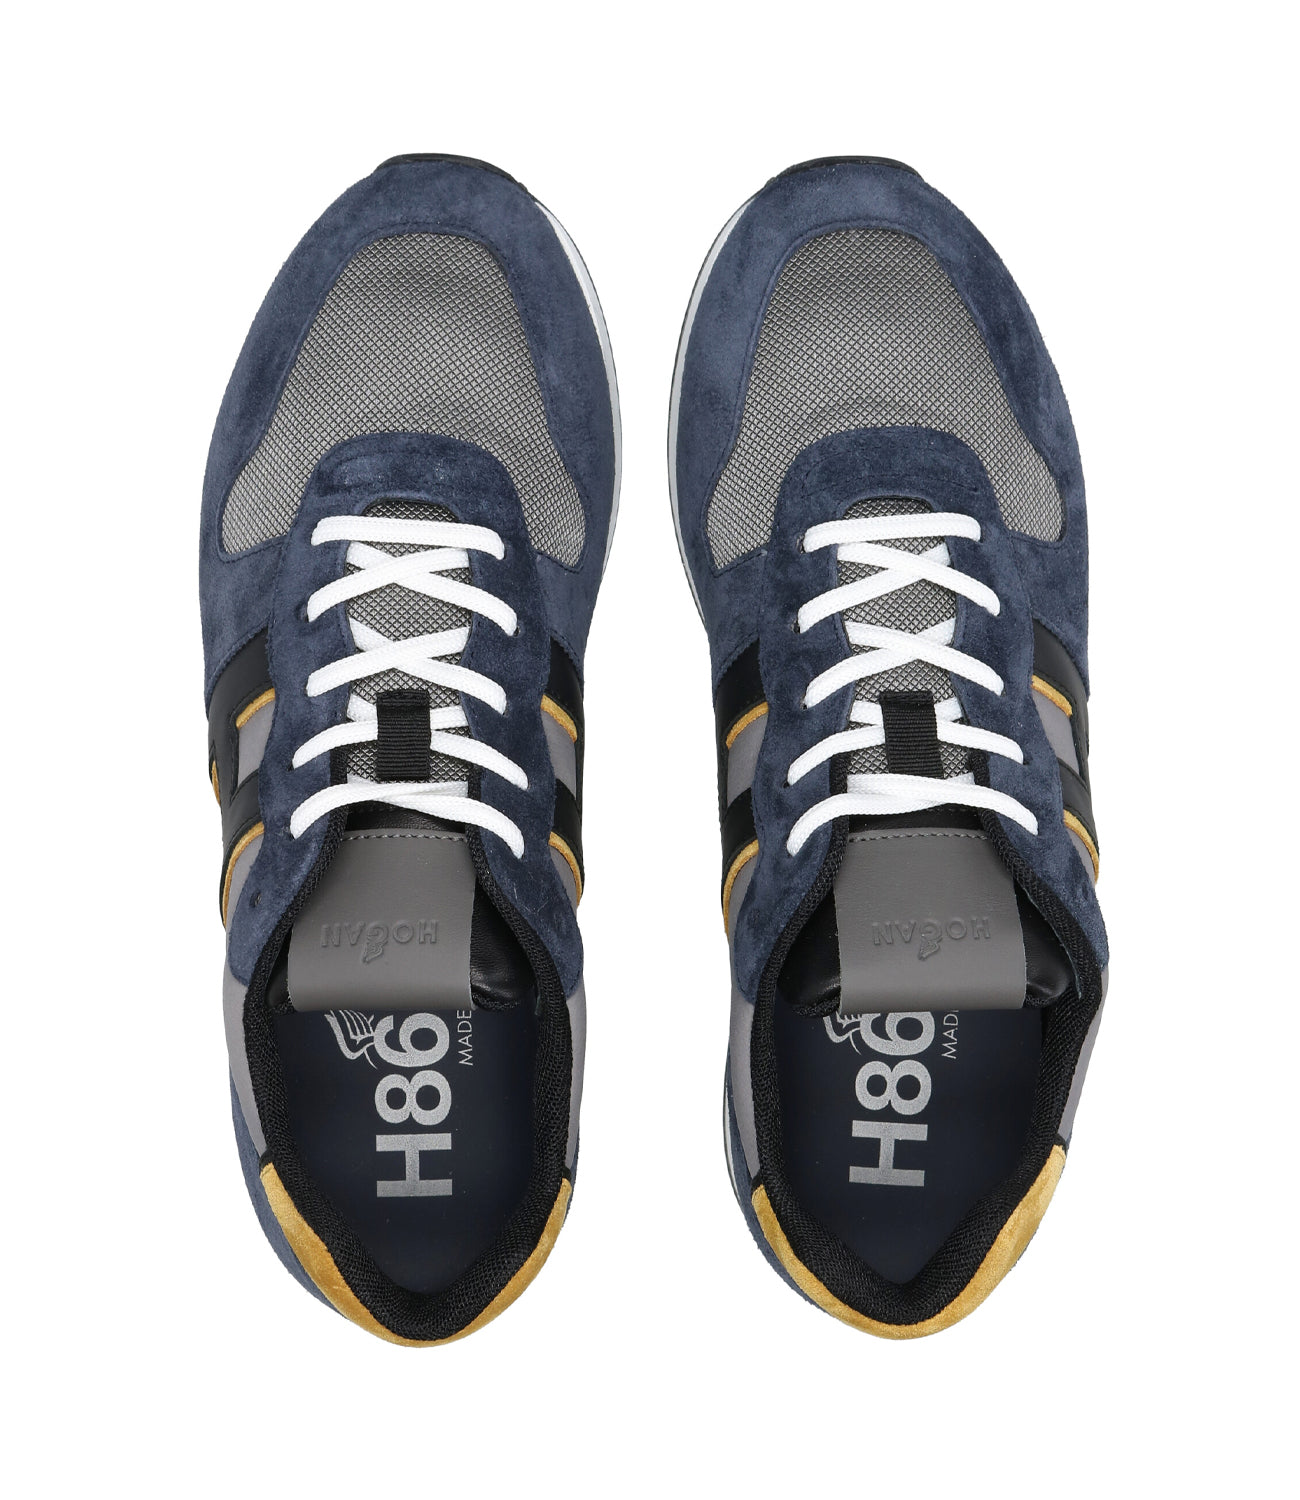 Hogan | Sneakers H383 Blue, Yellow and Grey